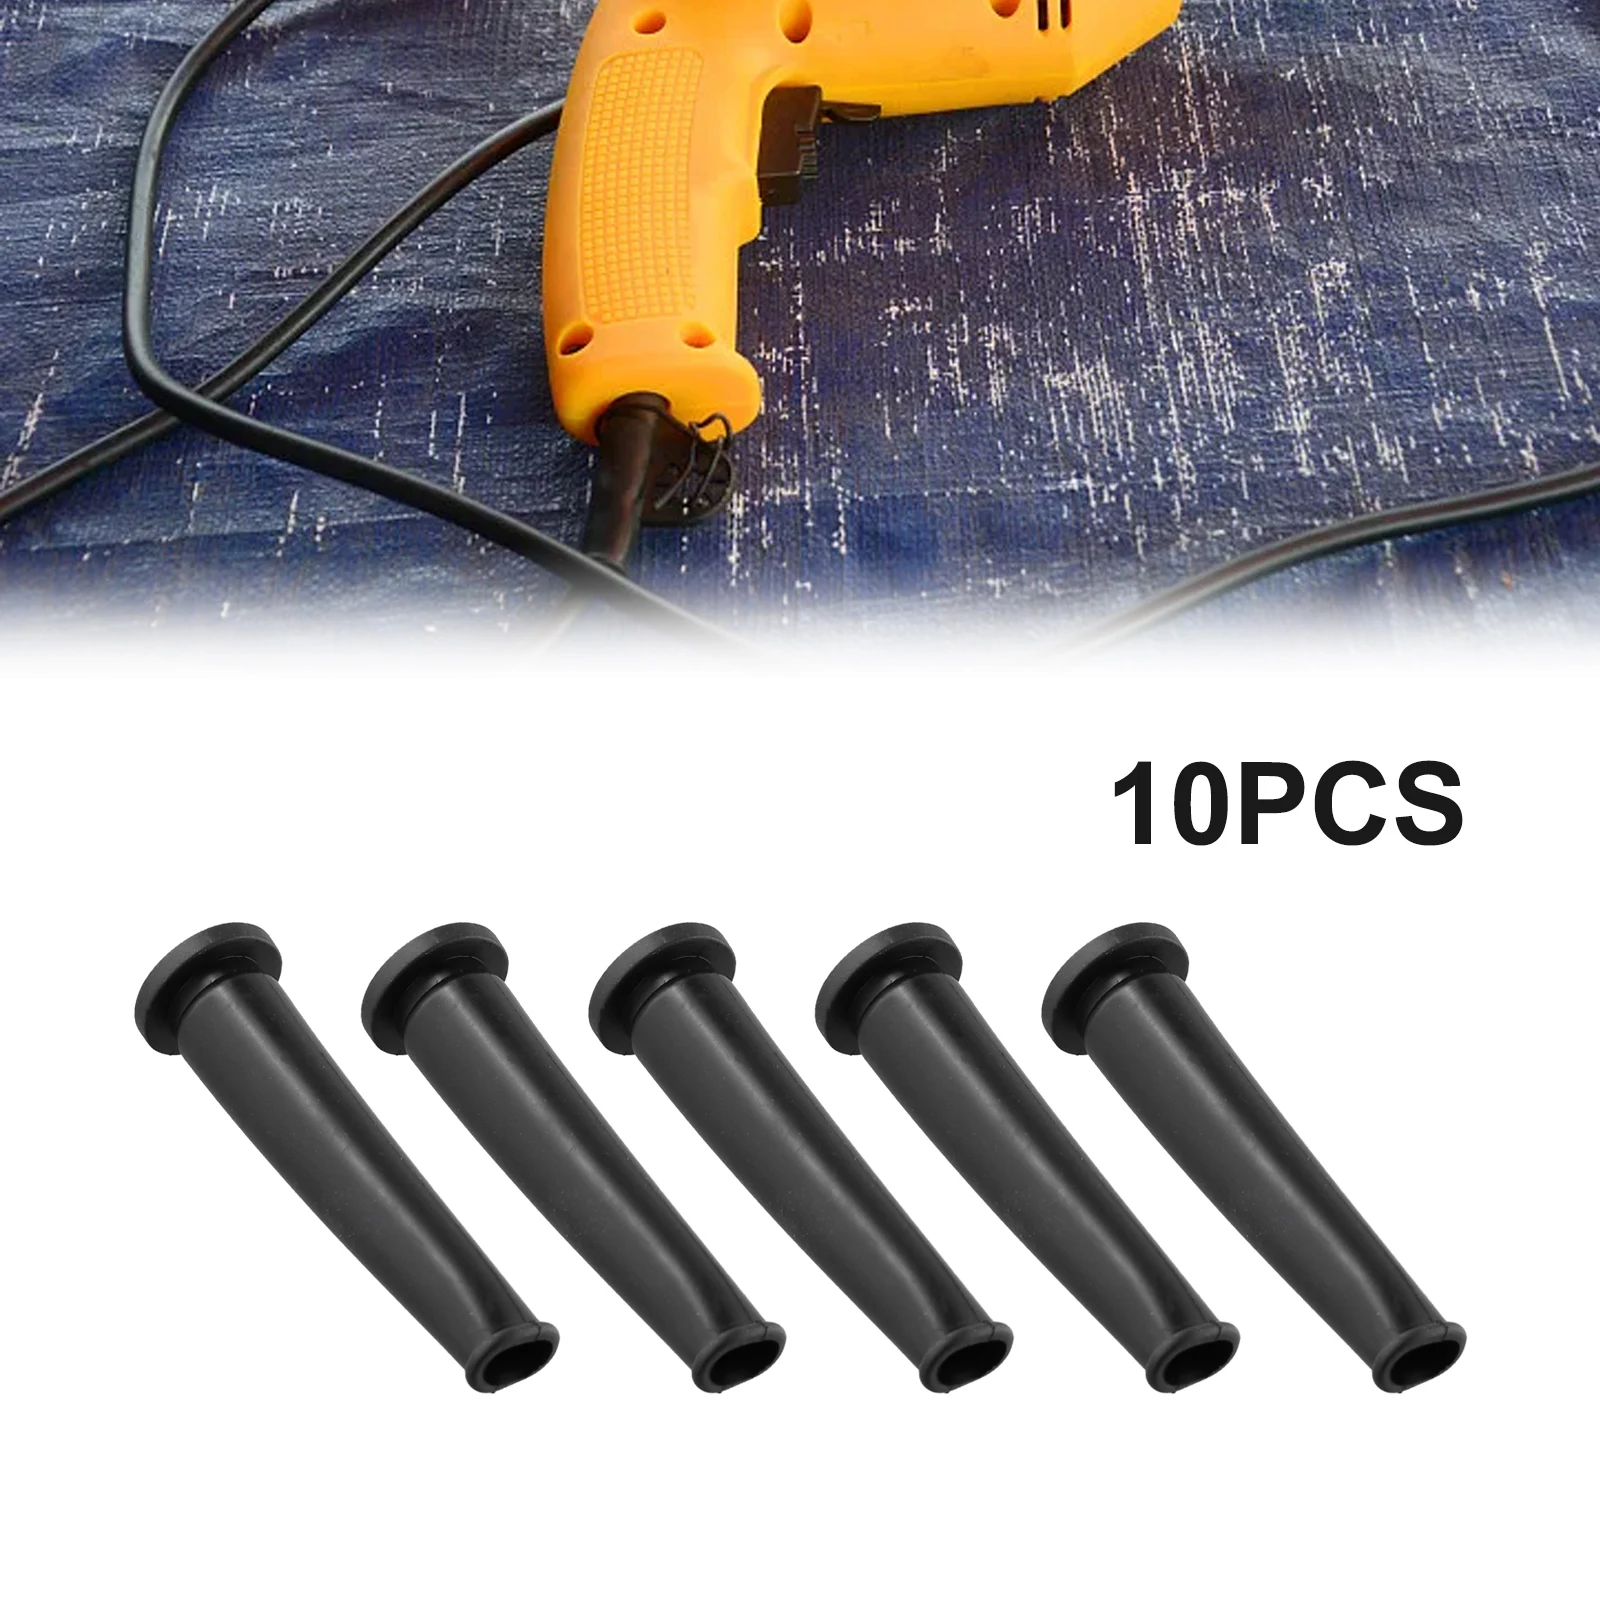 

10Pcs 9mm Black Rubber Wire Protector Cable Sleeve Boot Cover For Angle Grinder Accessories For Power Tools Power Cord